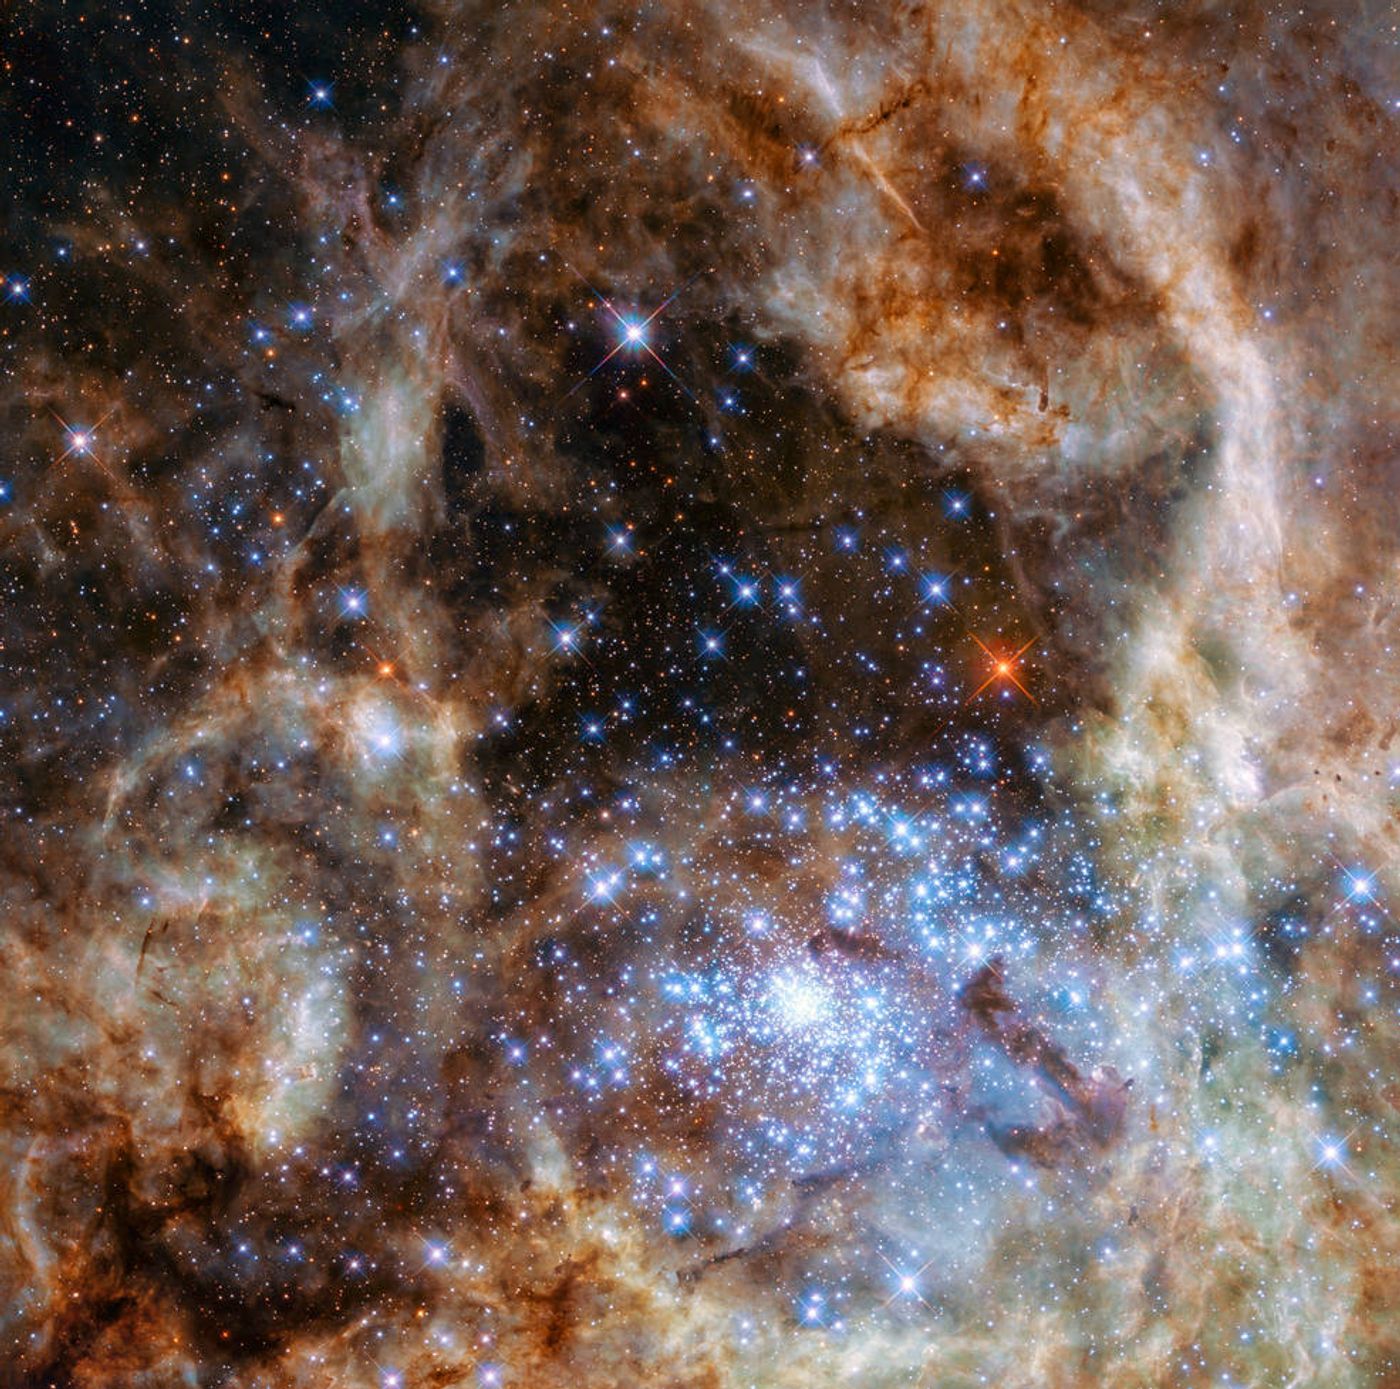 The cluster of young blue stars, as discovered by NASA's Hubble Space Telescope.